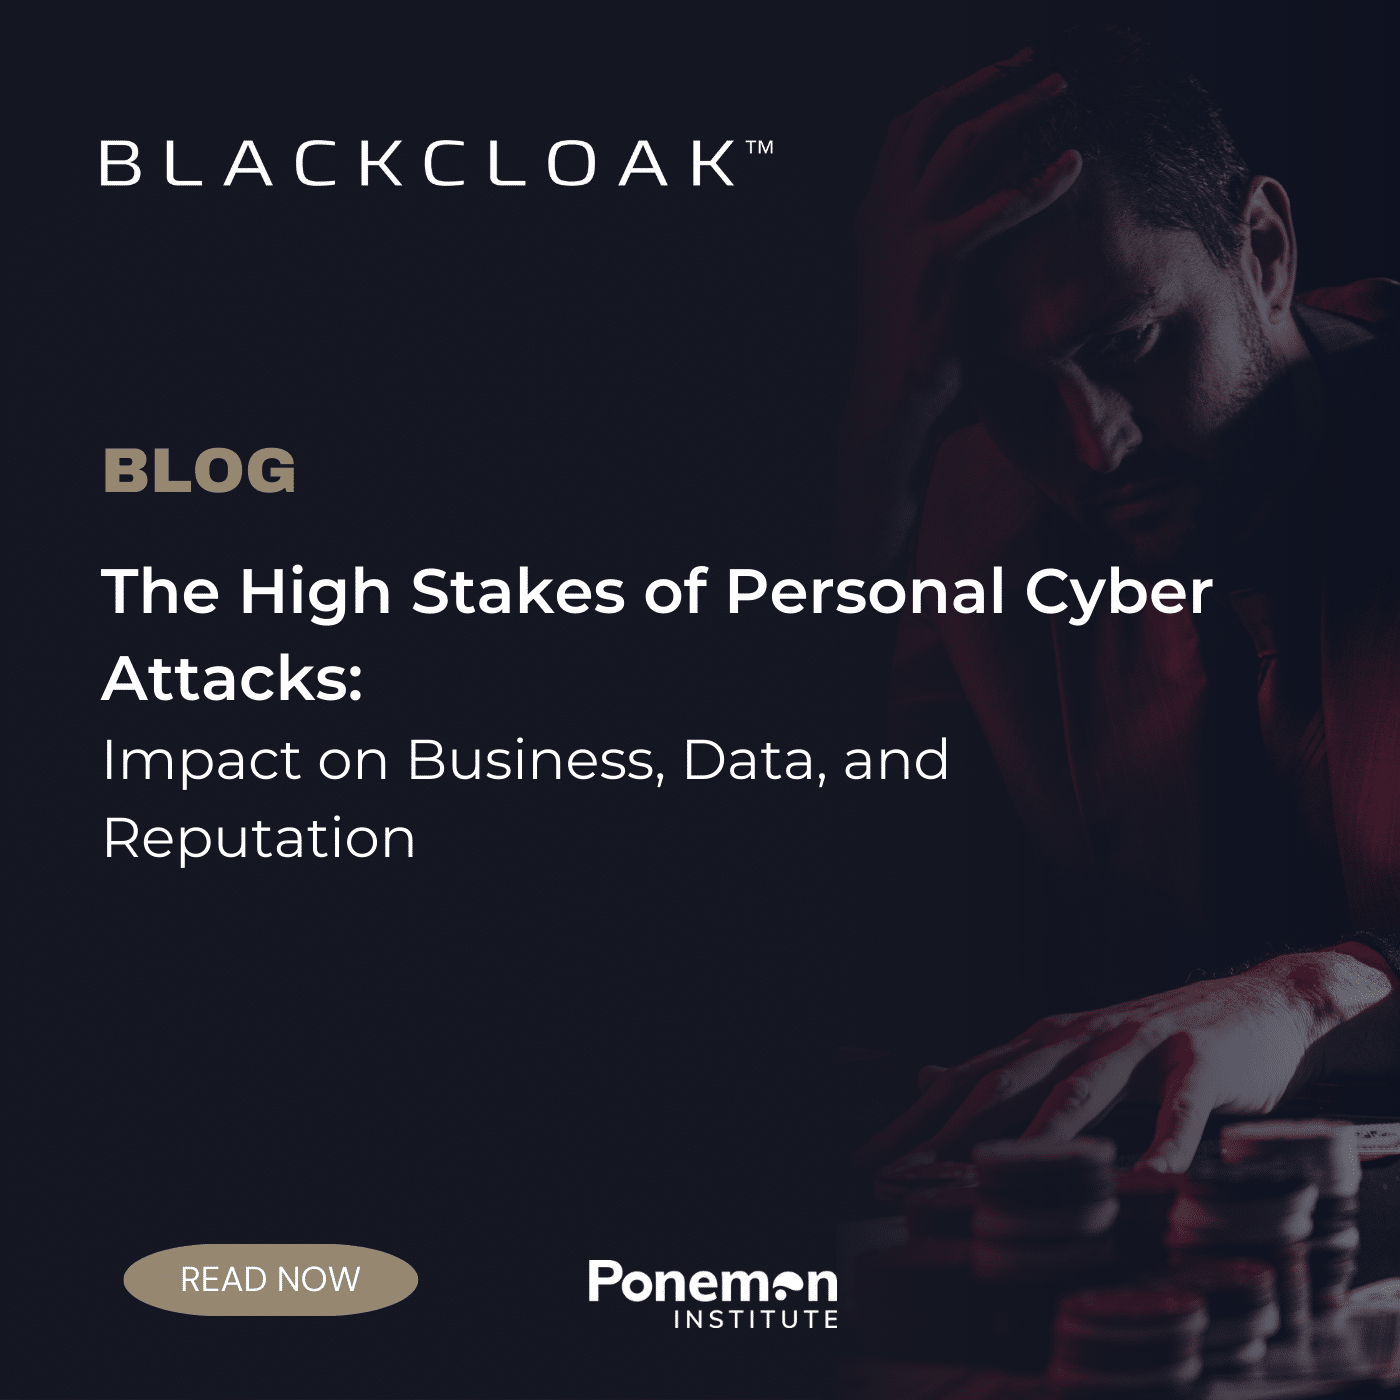 The High Stakes of Personal Cyber Attack: Impact on business, data, and reputation